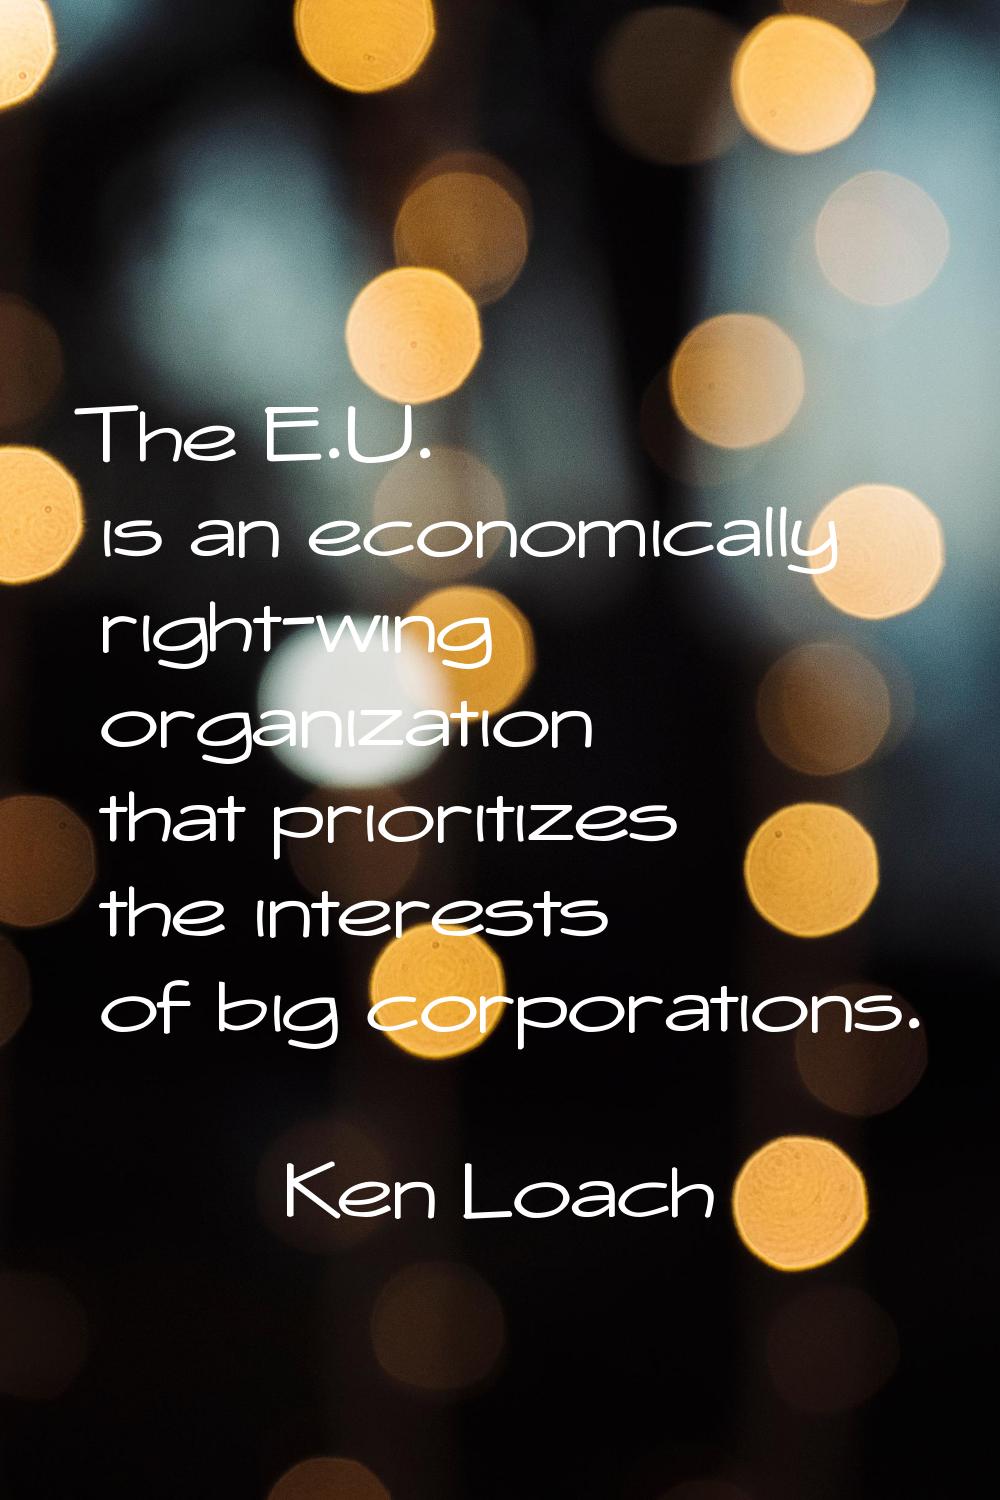 The E.U. is an economically right-wing organization that prioritizes the interests of big corporati